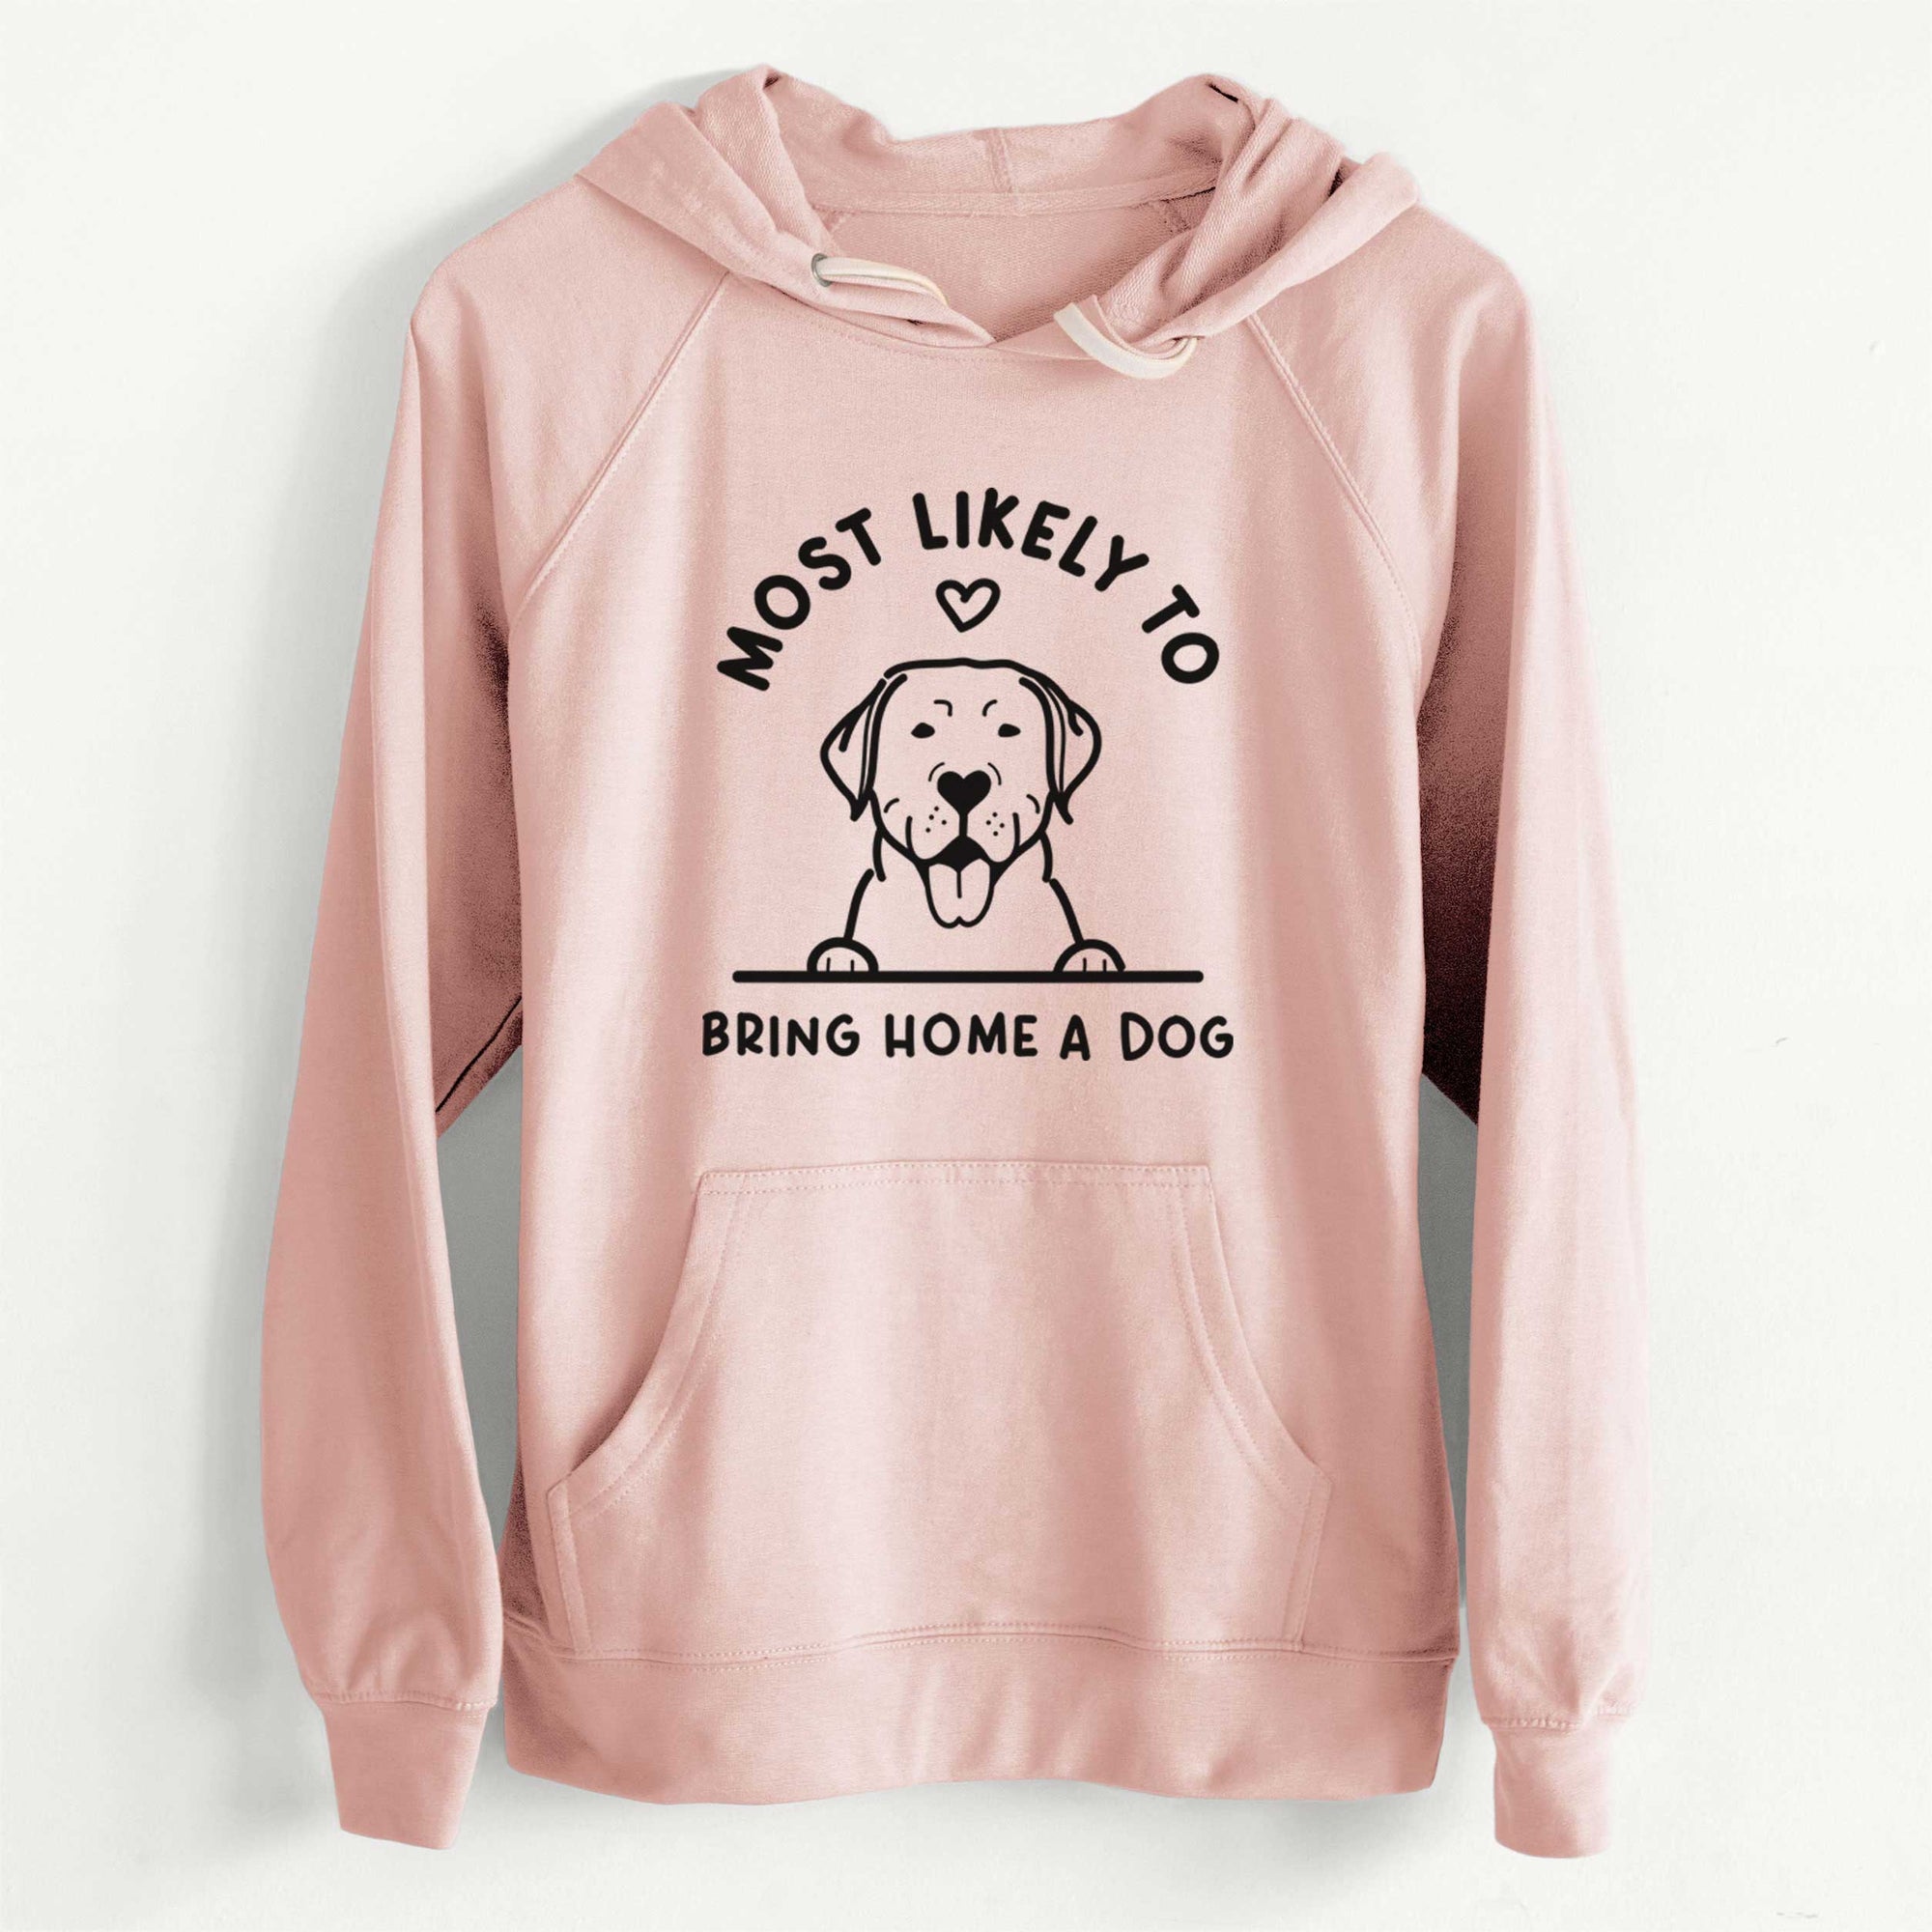 Most Likely to Bring Home a Dog - Labrador Retriever - Unisex Loopback Terry Hoodie